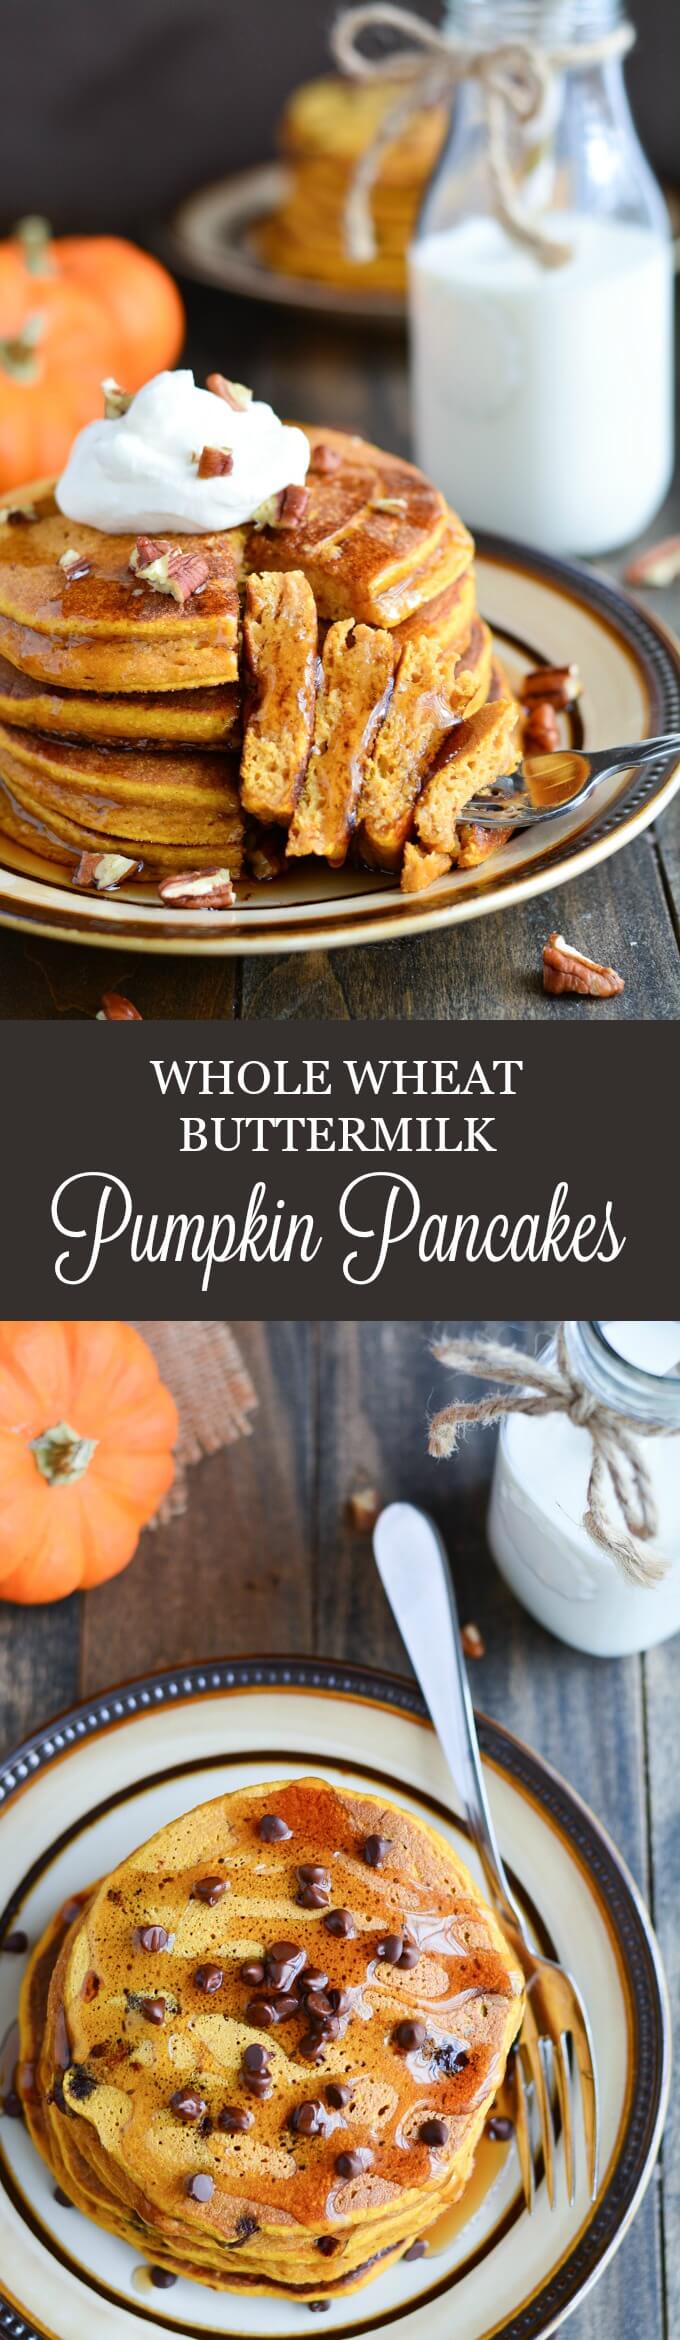 Whole Wheat Buttermilk Pumpkin Pancakes are thick, fluffy, and healthy. They're the perfect breakfast for a cool fall morning.